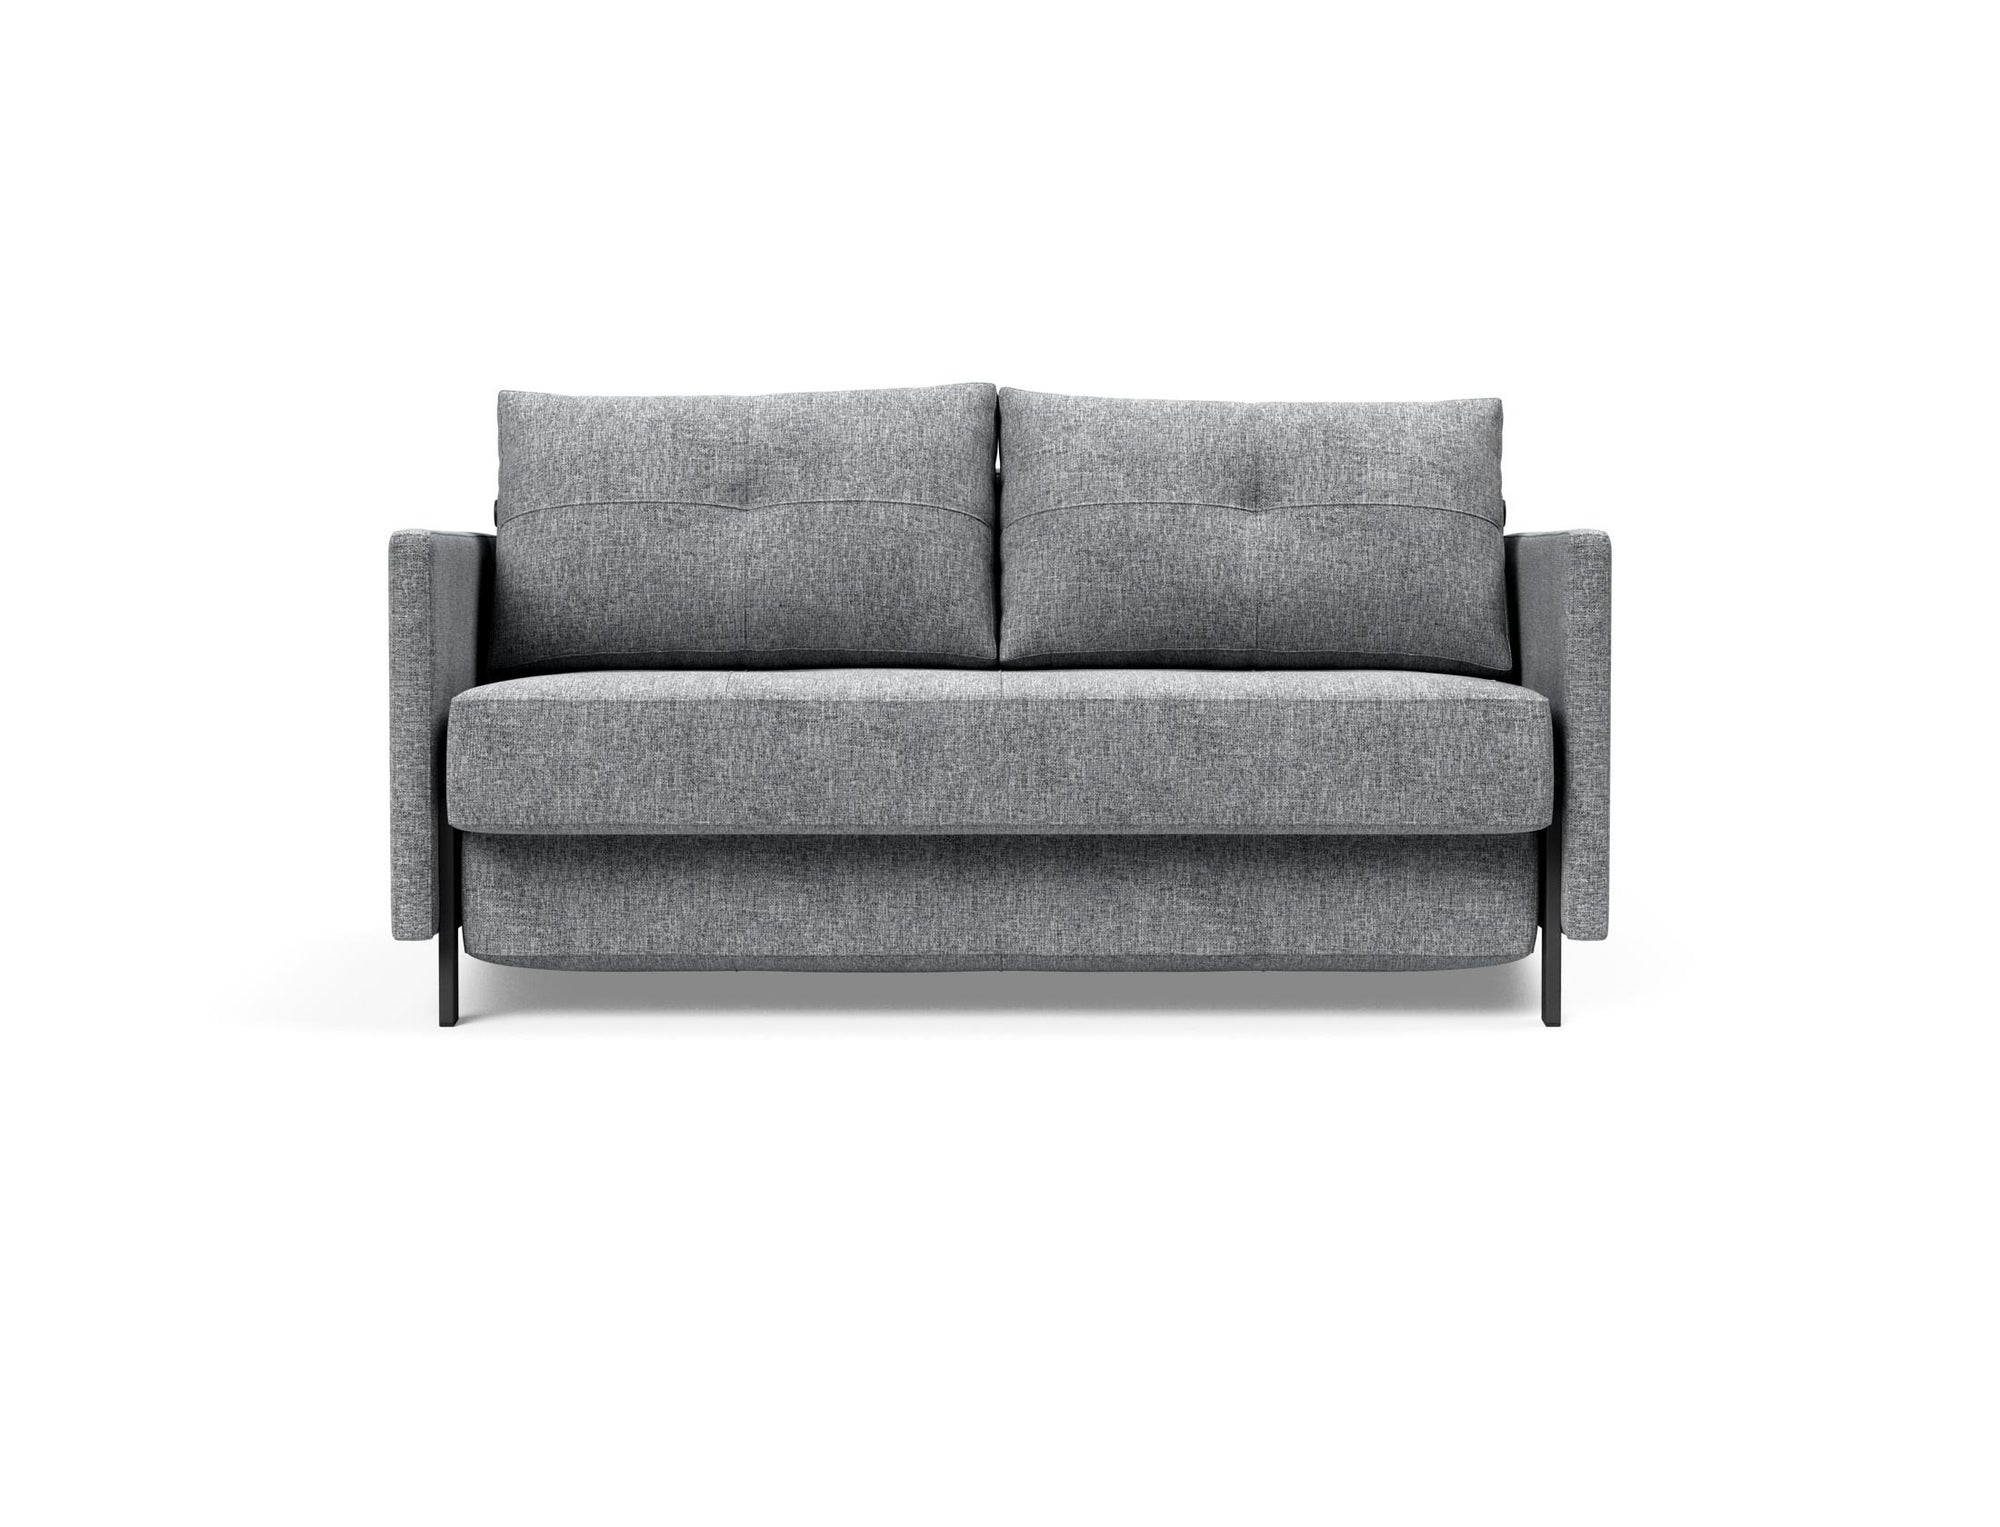 CUBED Deluxe Sofabed 140CM